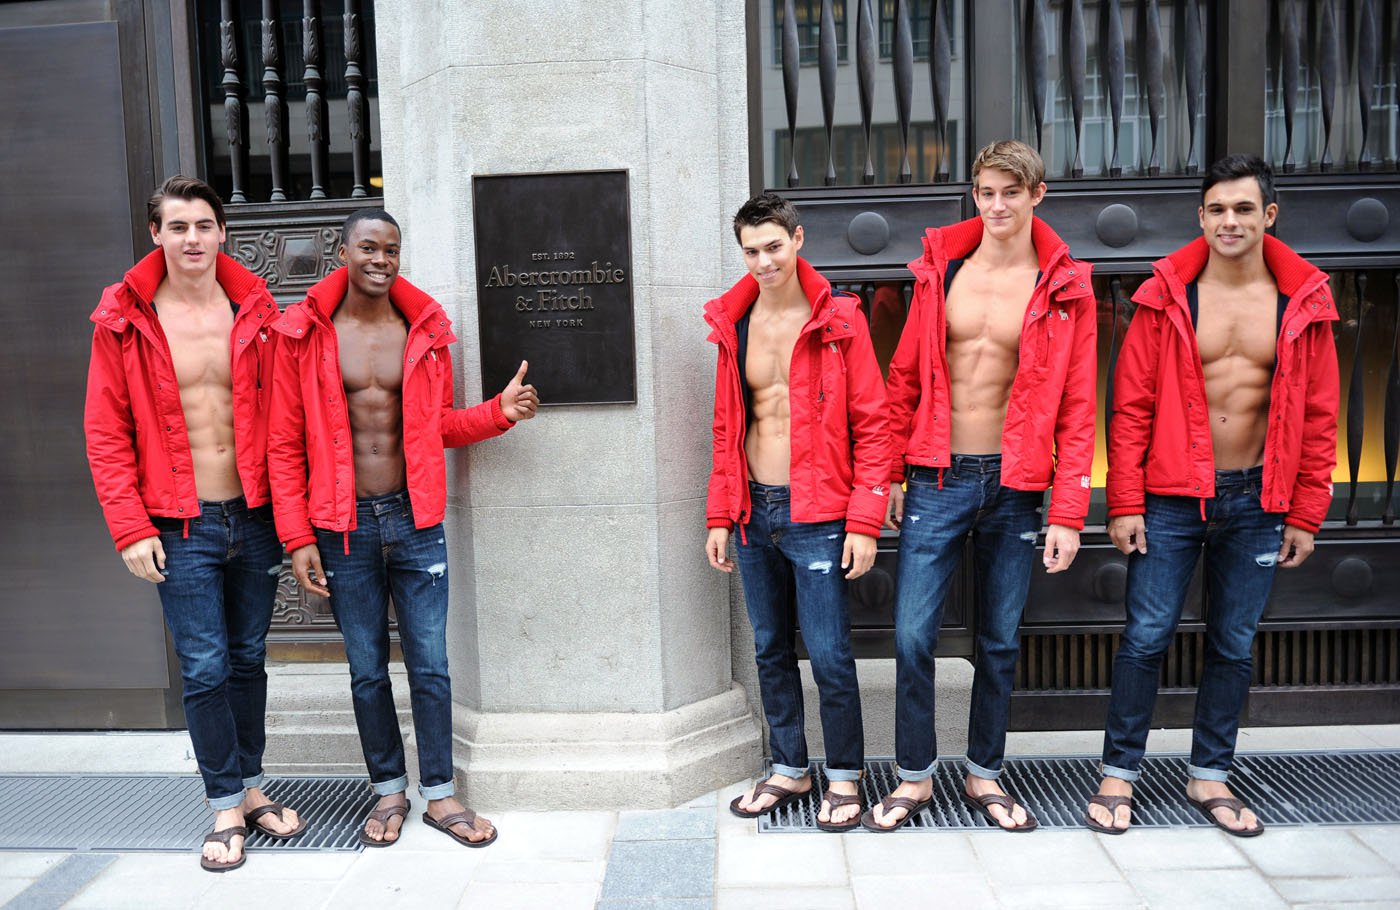 Attitude's Editor in Chief hits back at Abercrombie & Fitch over viral ...